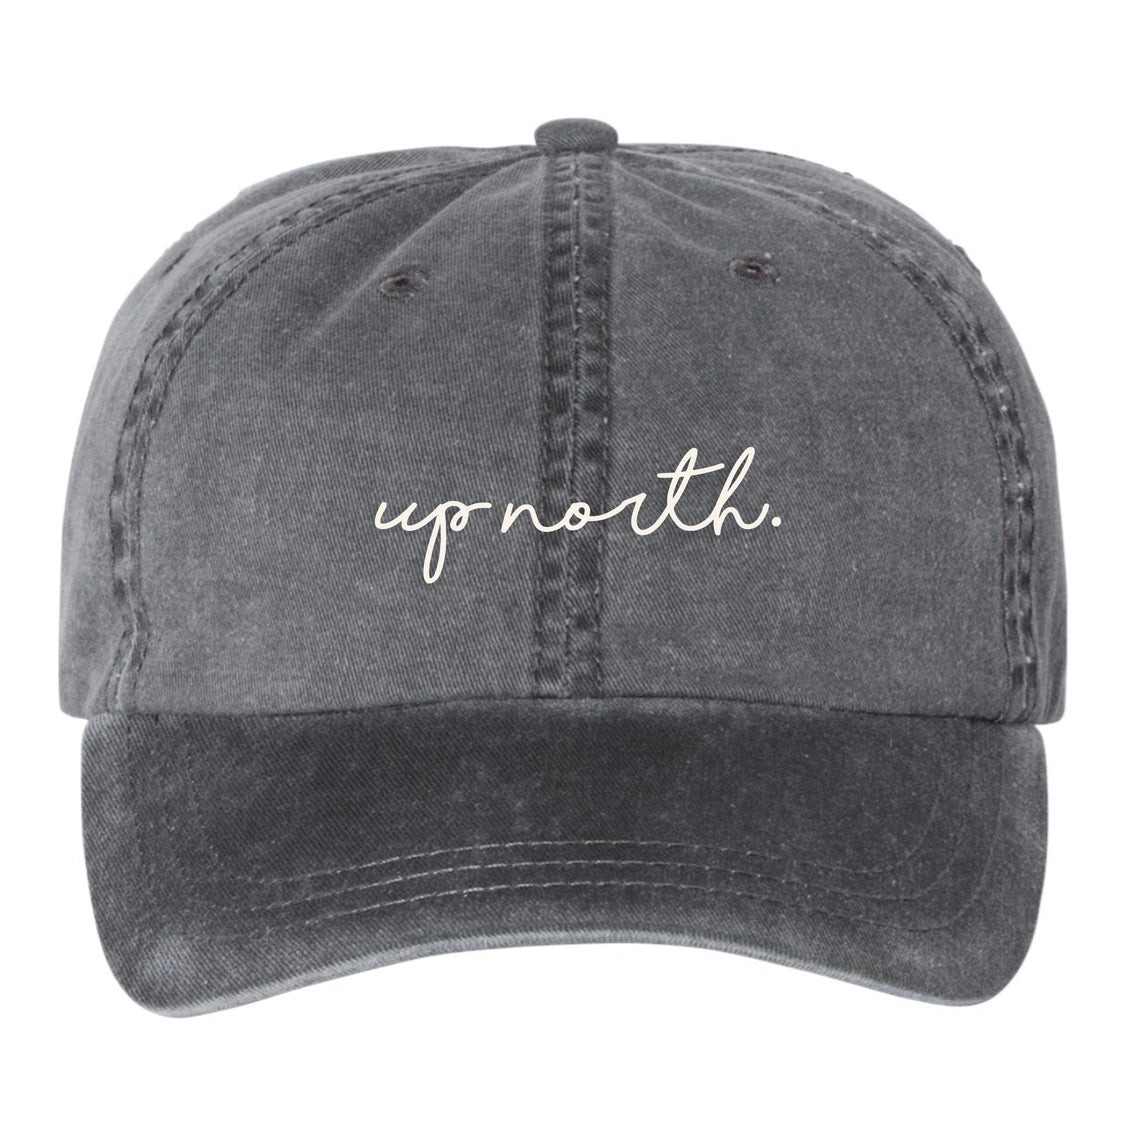 Up North Embroidered Hat.  Washed Black